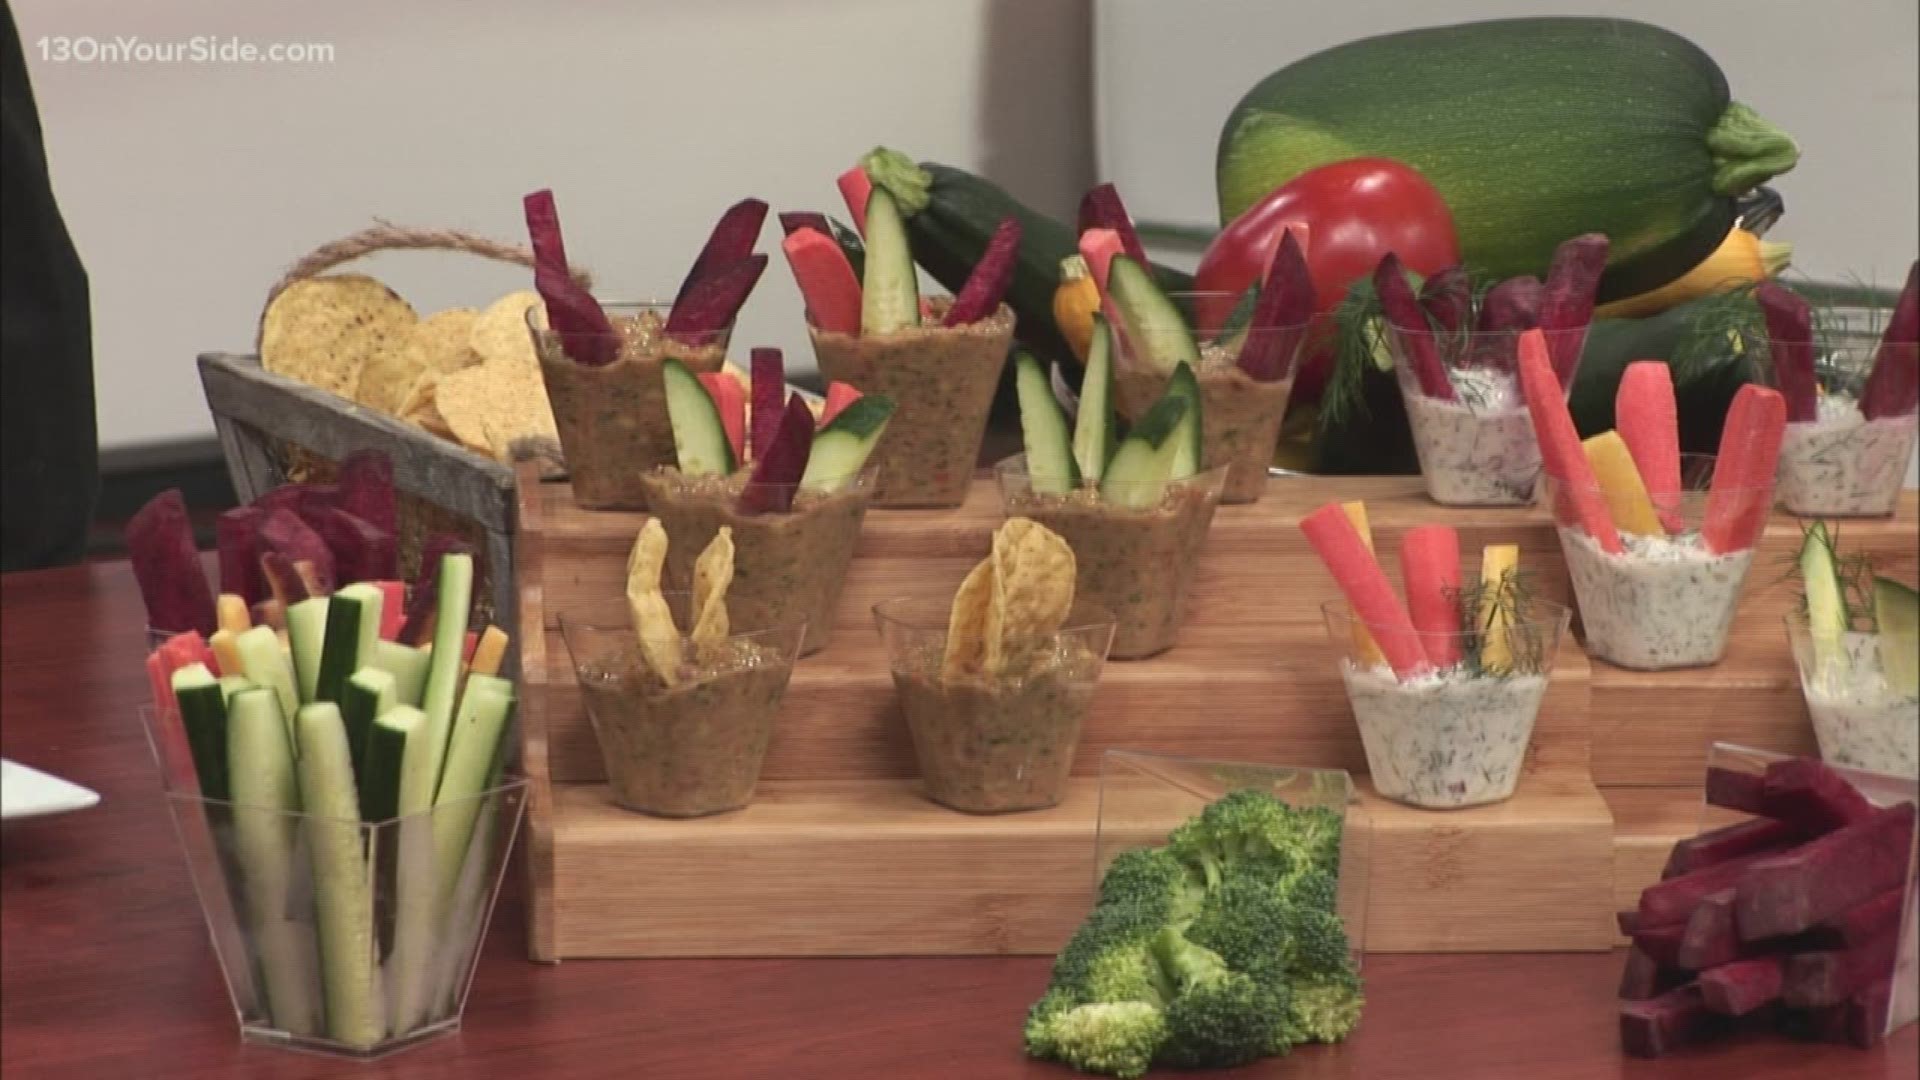 Keeping kids away from candy, chips and other junk snack foods can be hard in the summer. Chef Jen, joined by her granddaughter, joined 13 ON YOUR SIDE at Noon to share some tasty and healthy summer snacks that are perfect for kids.